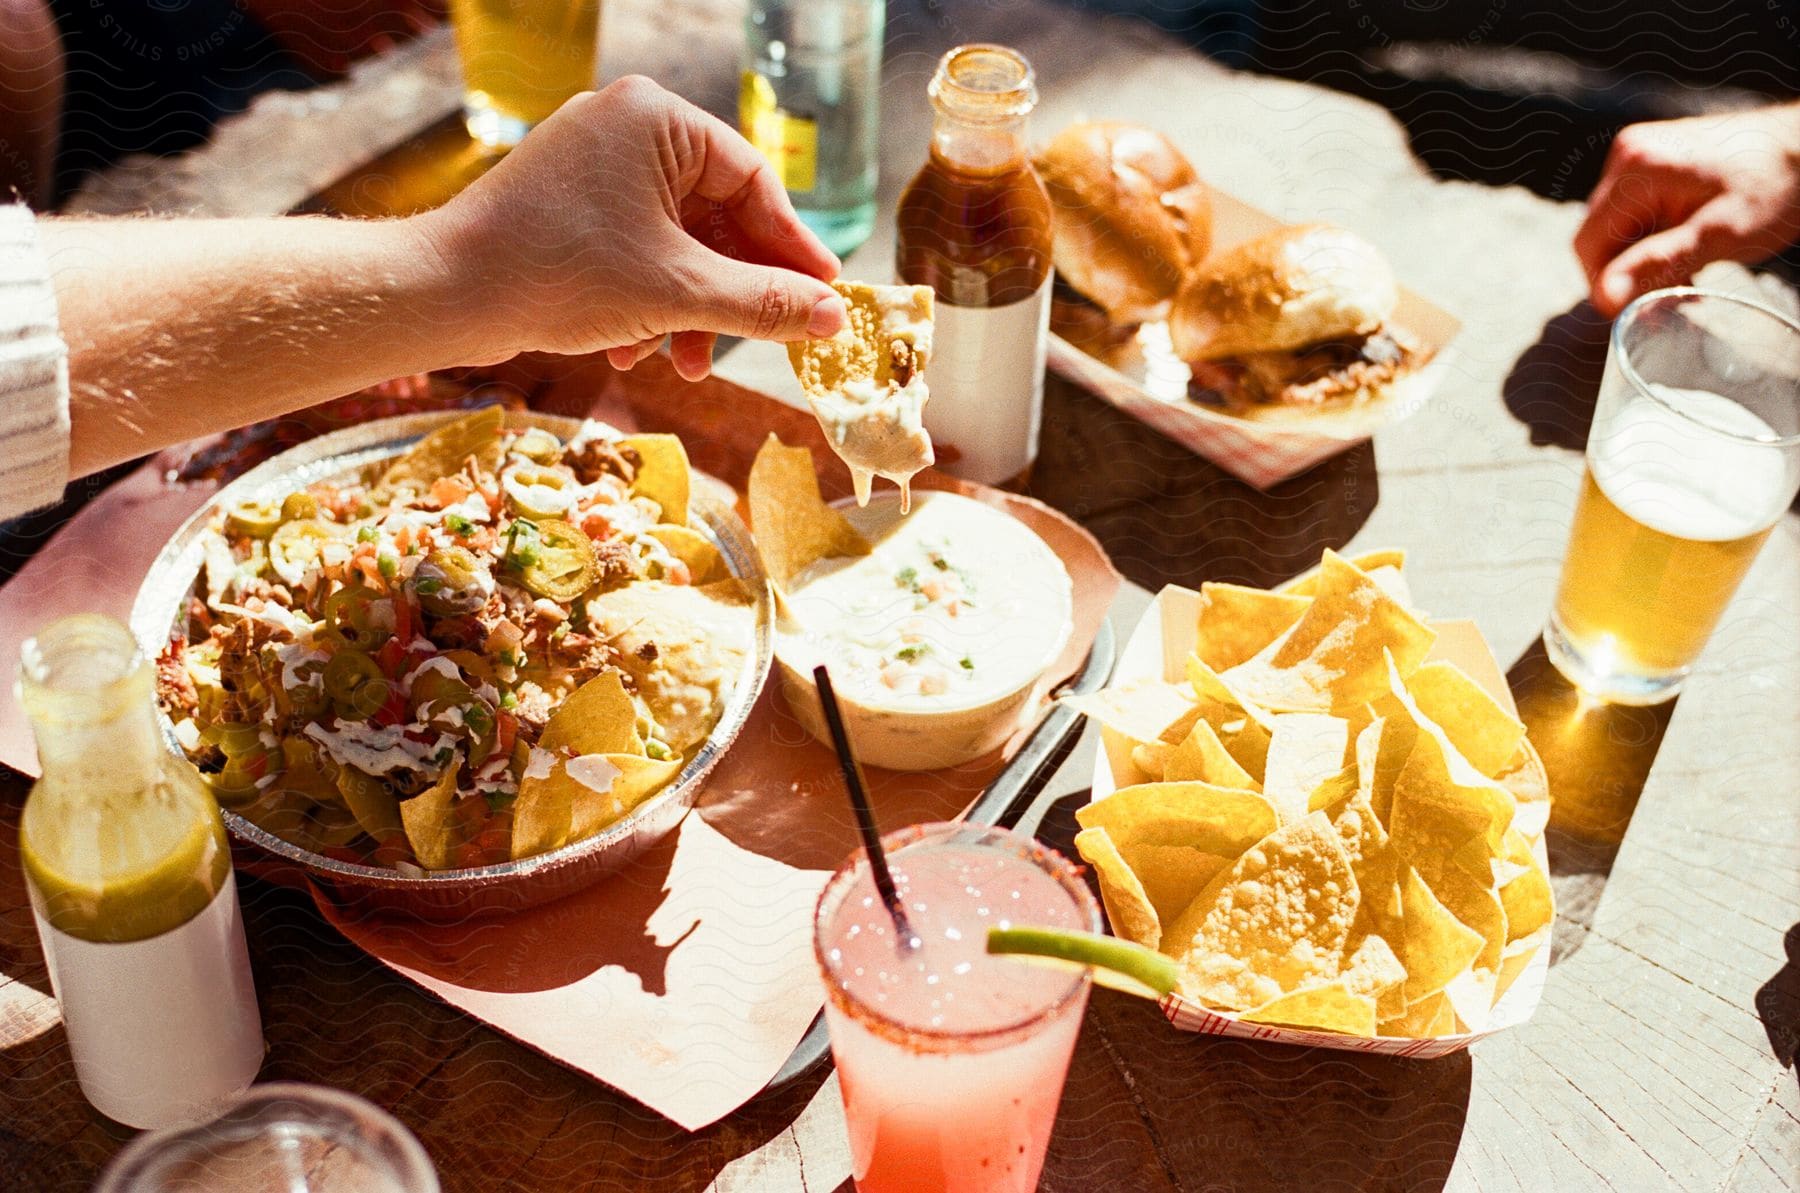 Person dipping a tortilla chip into a bowl of queso beside a plate of loaded nachos, with beverages on a sunny table.